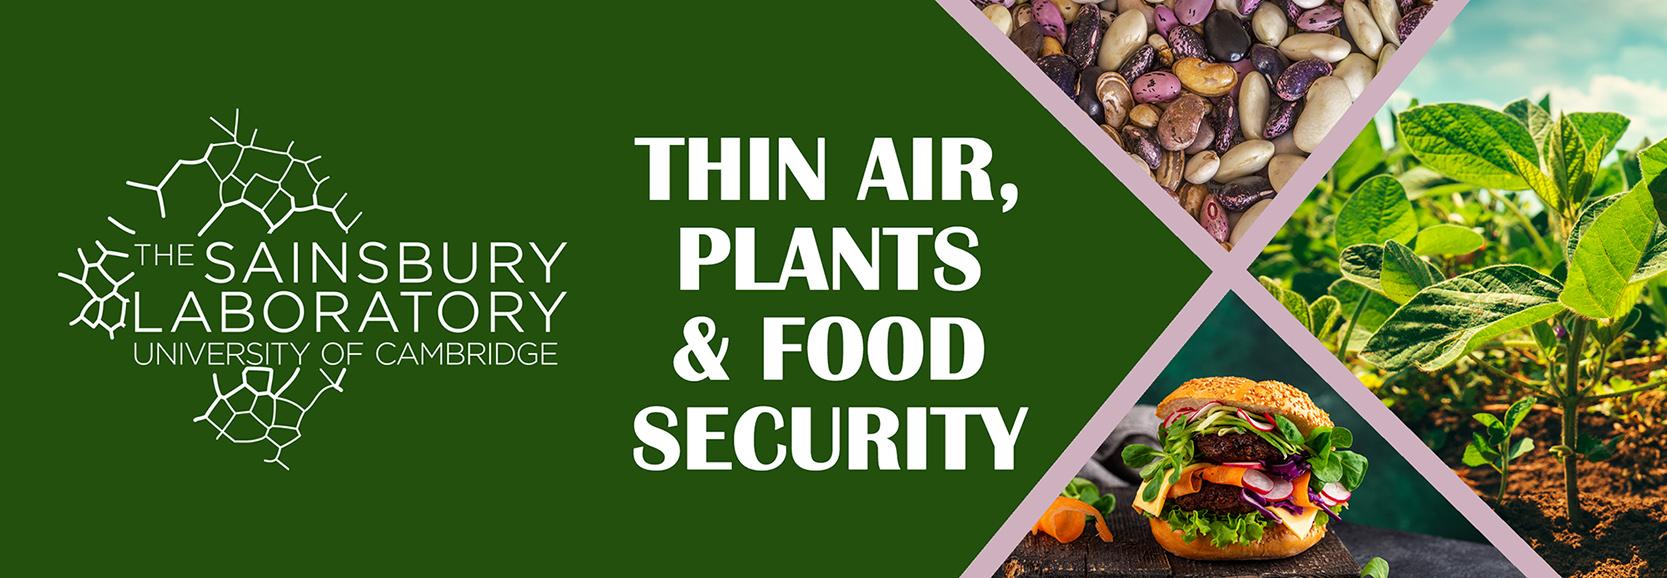 Thin air, plants and food security banner with images of beans, impossible burger and soy crop